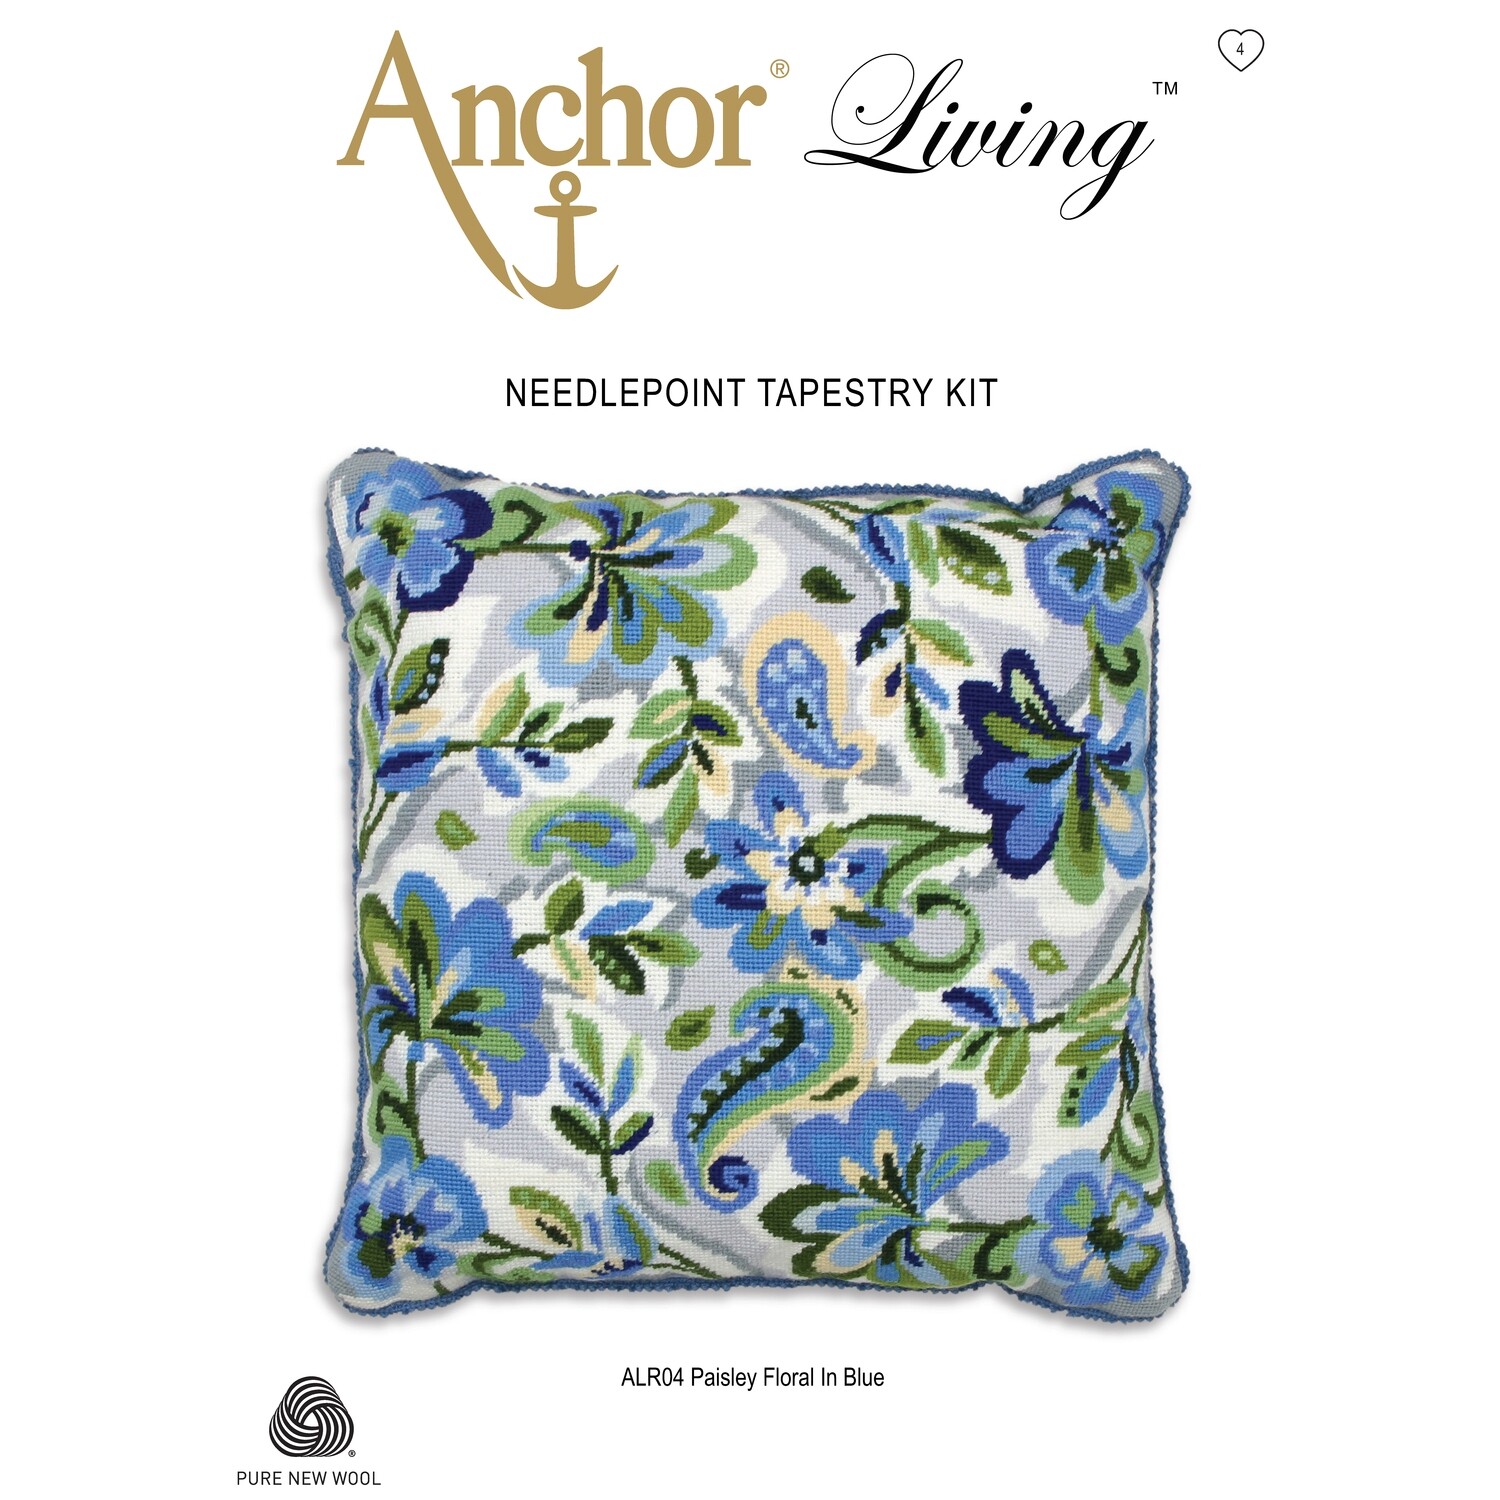 Anchor Living Tapestry Kit - Tapestry Paisley Floral Blue Cushion